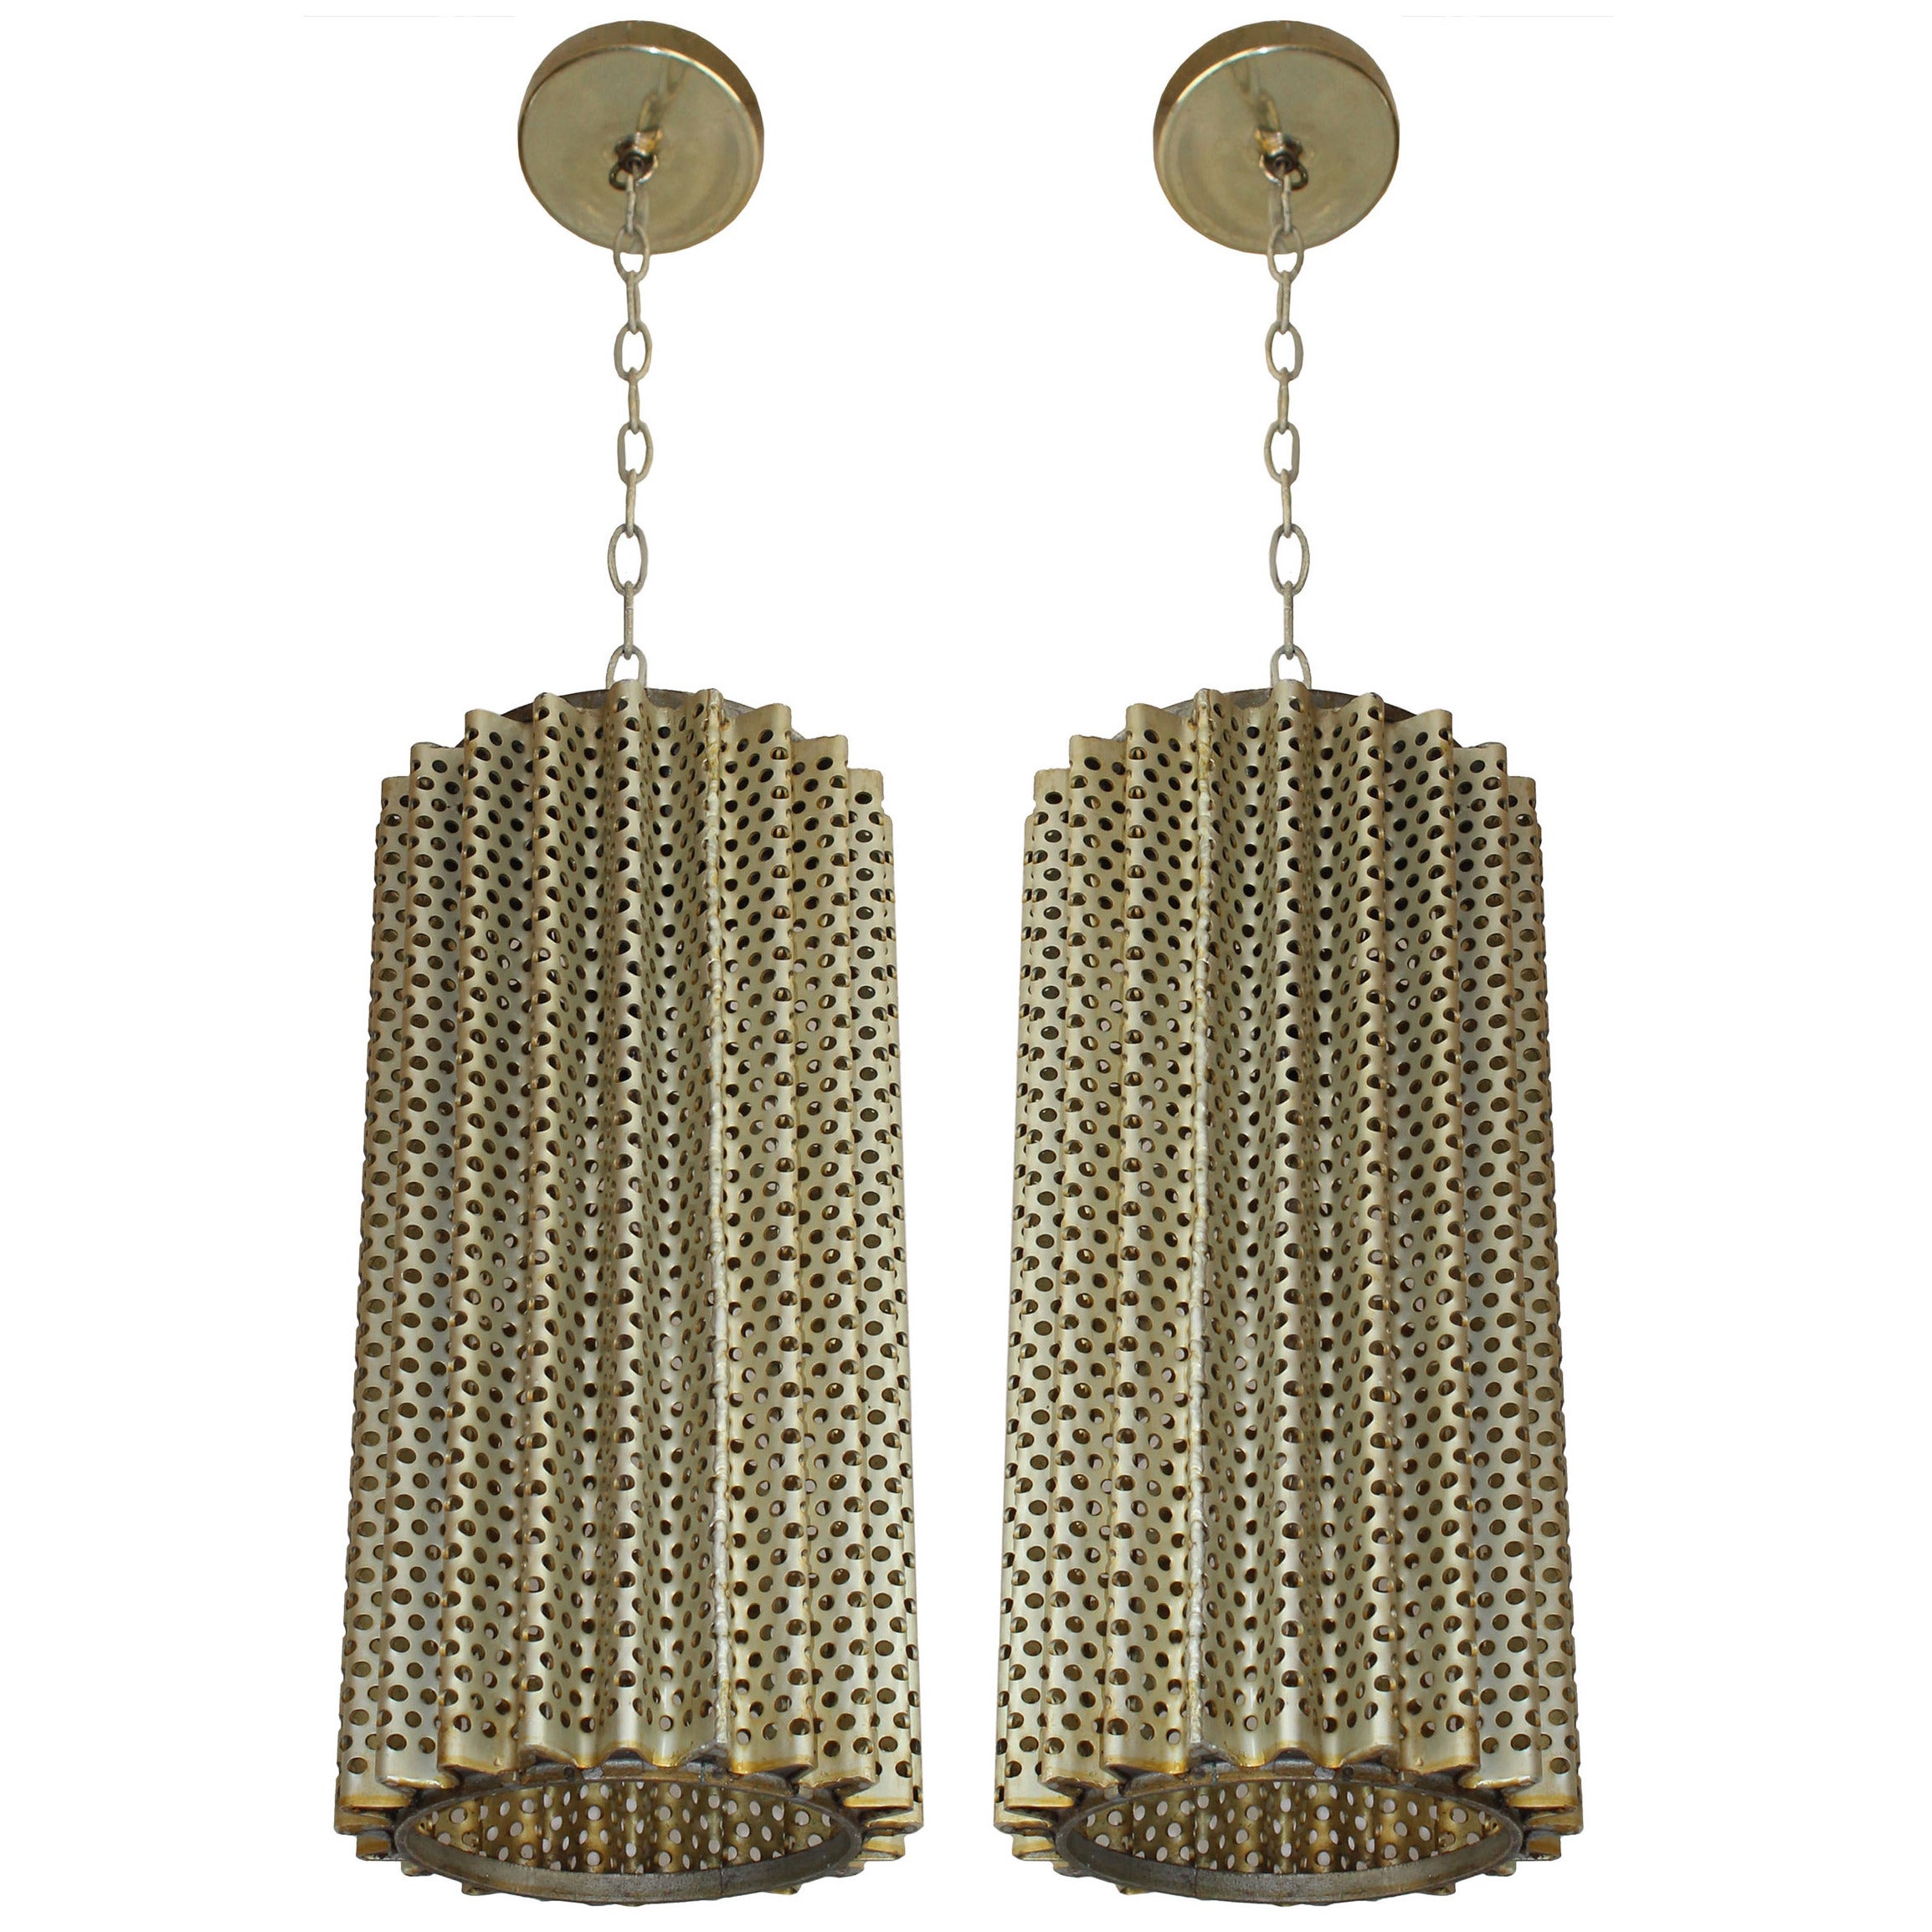 Pair of Perforated Pendants